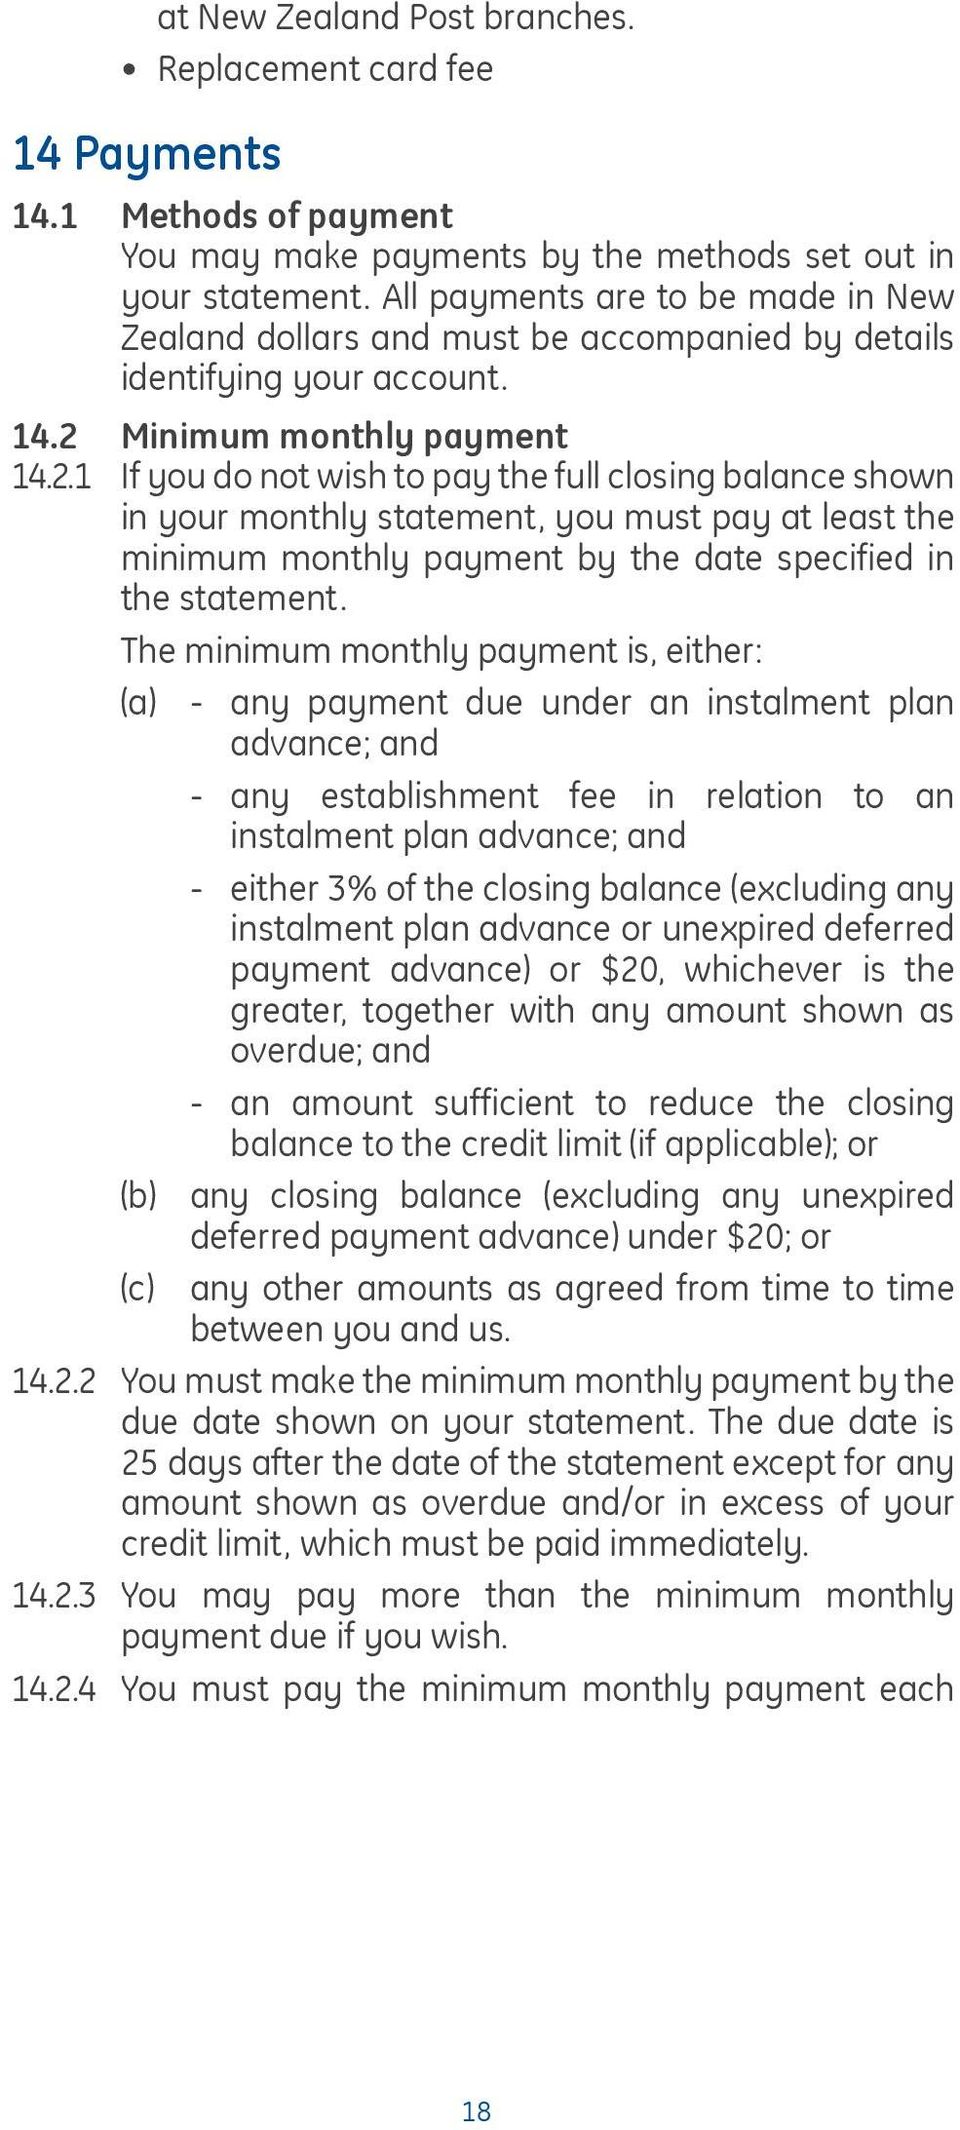 Minimum monthly payment 14.2.